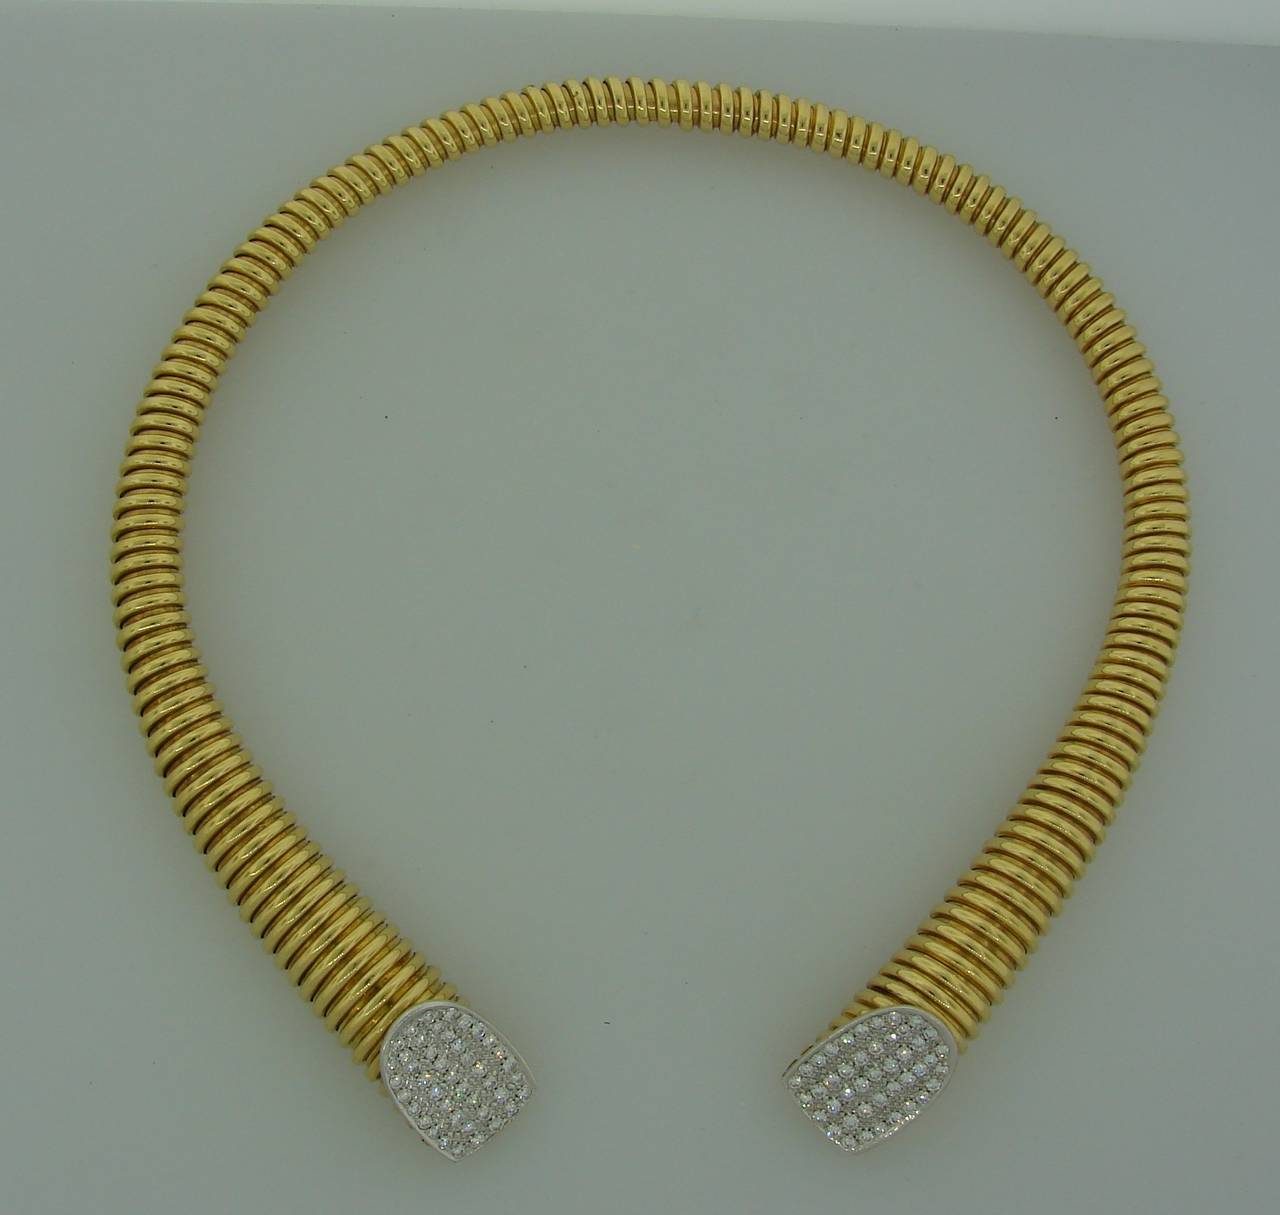 Stunning elegant tubogas choker necklace created by Cartier in Italy in the 1970's. The necklace is made of 18k yellow gold, the ends are accented with round brilliant cut diamonds set in 18k white gold. 

The necklace is 1/2